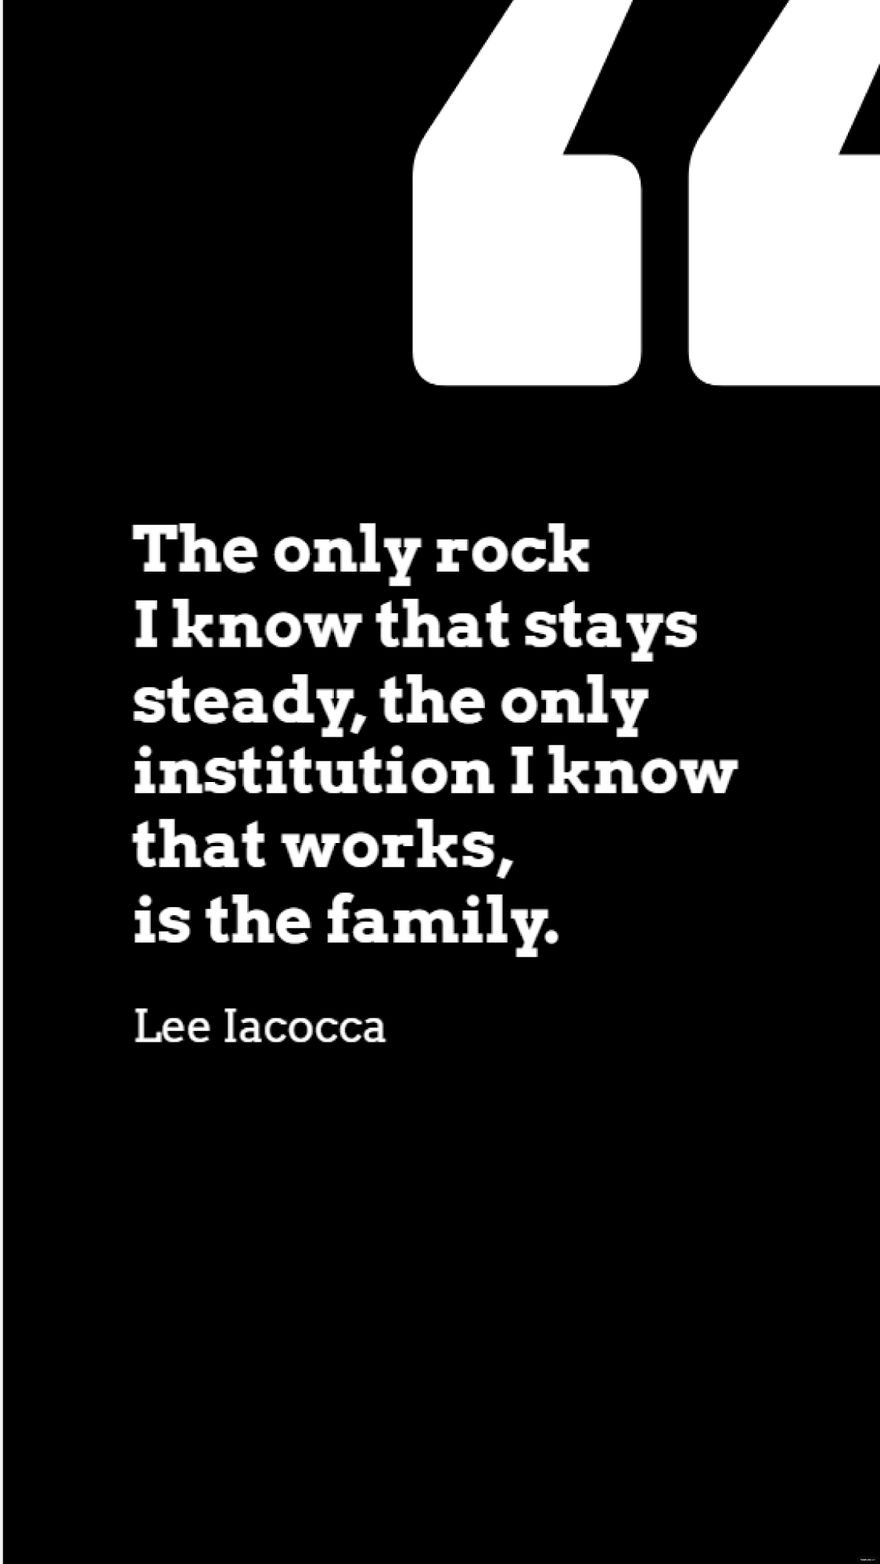 Lee Iacocca - The only rock I know that stays steady, the only institution I know that works, is the family.